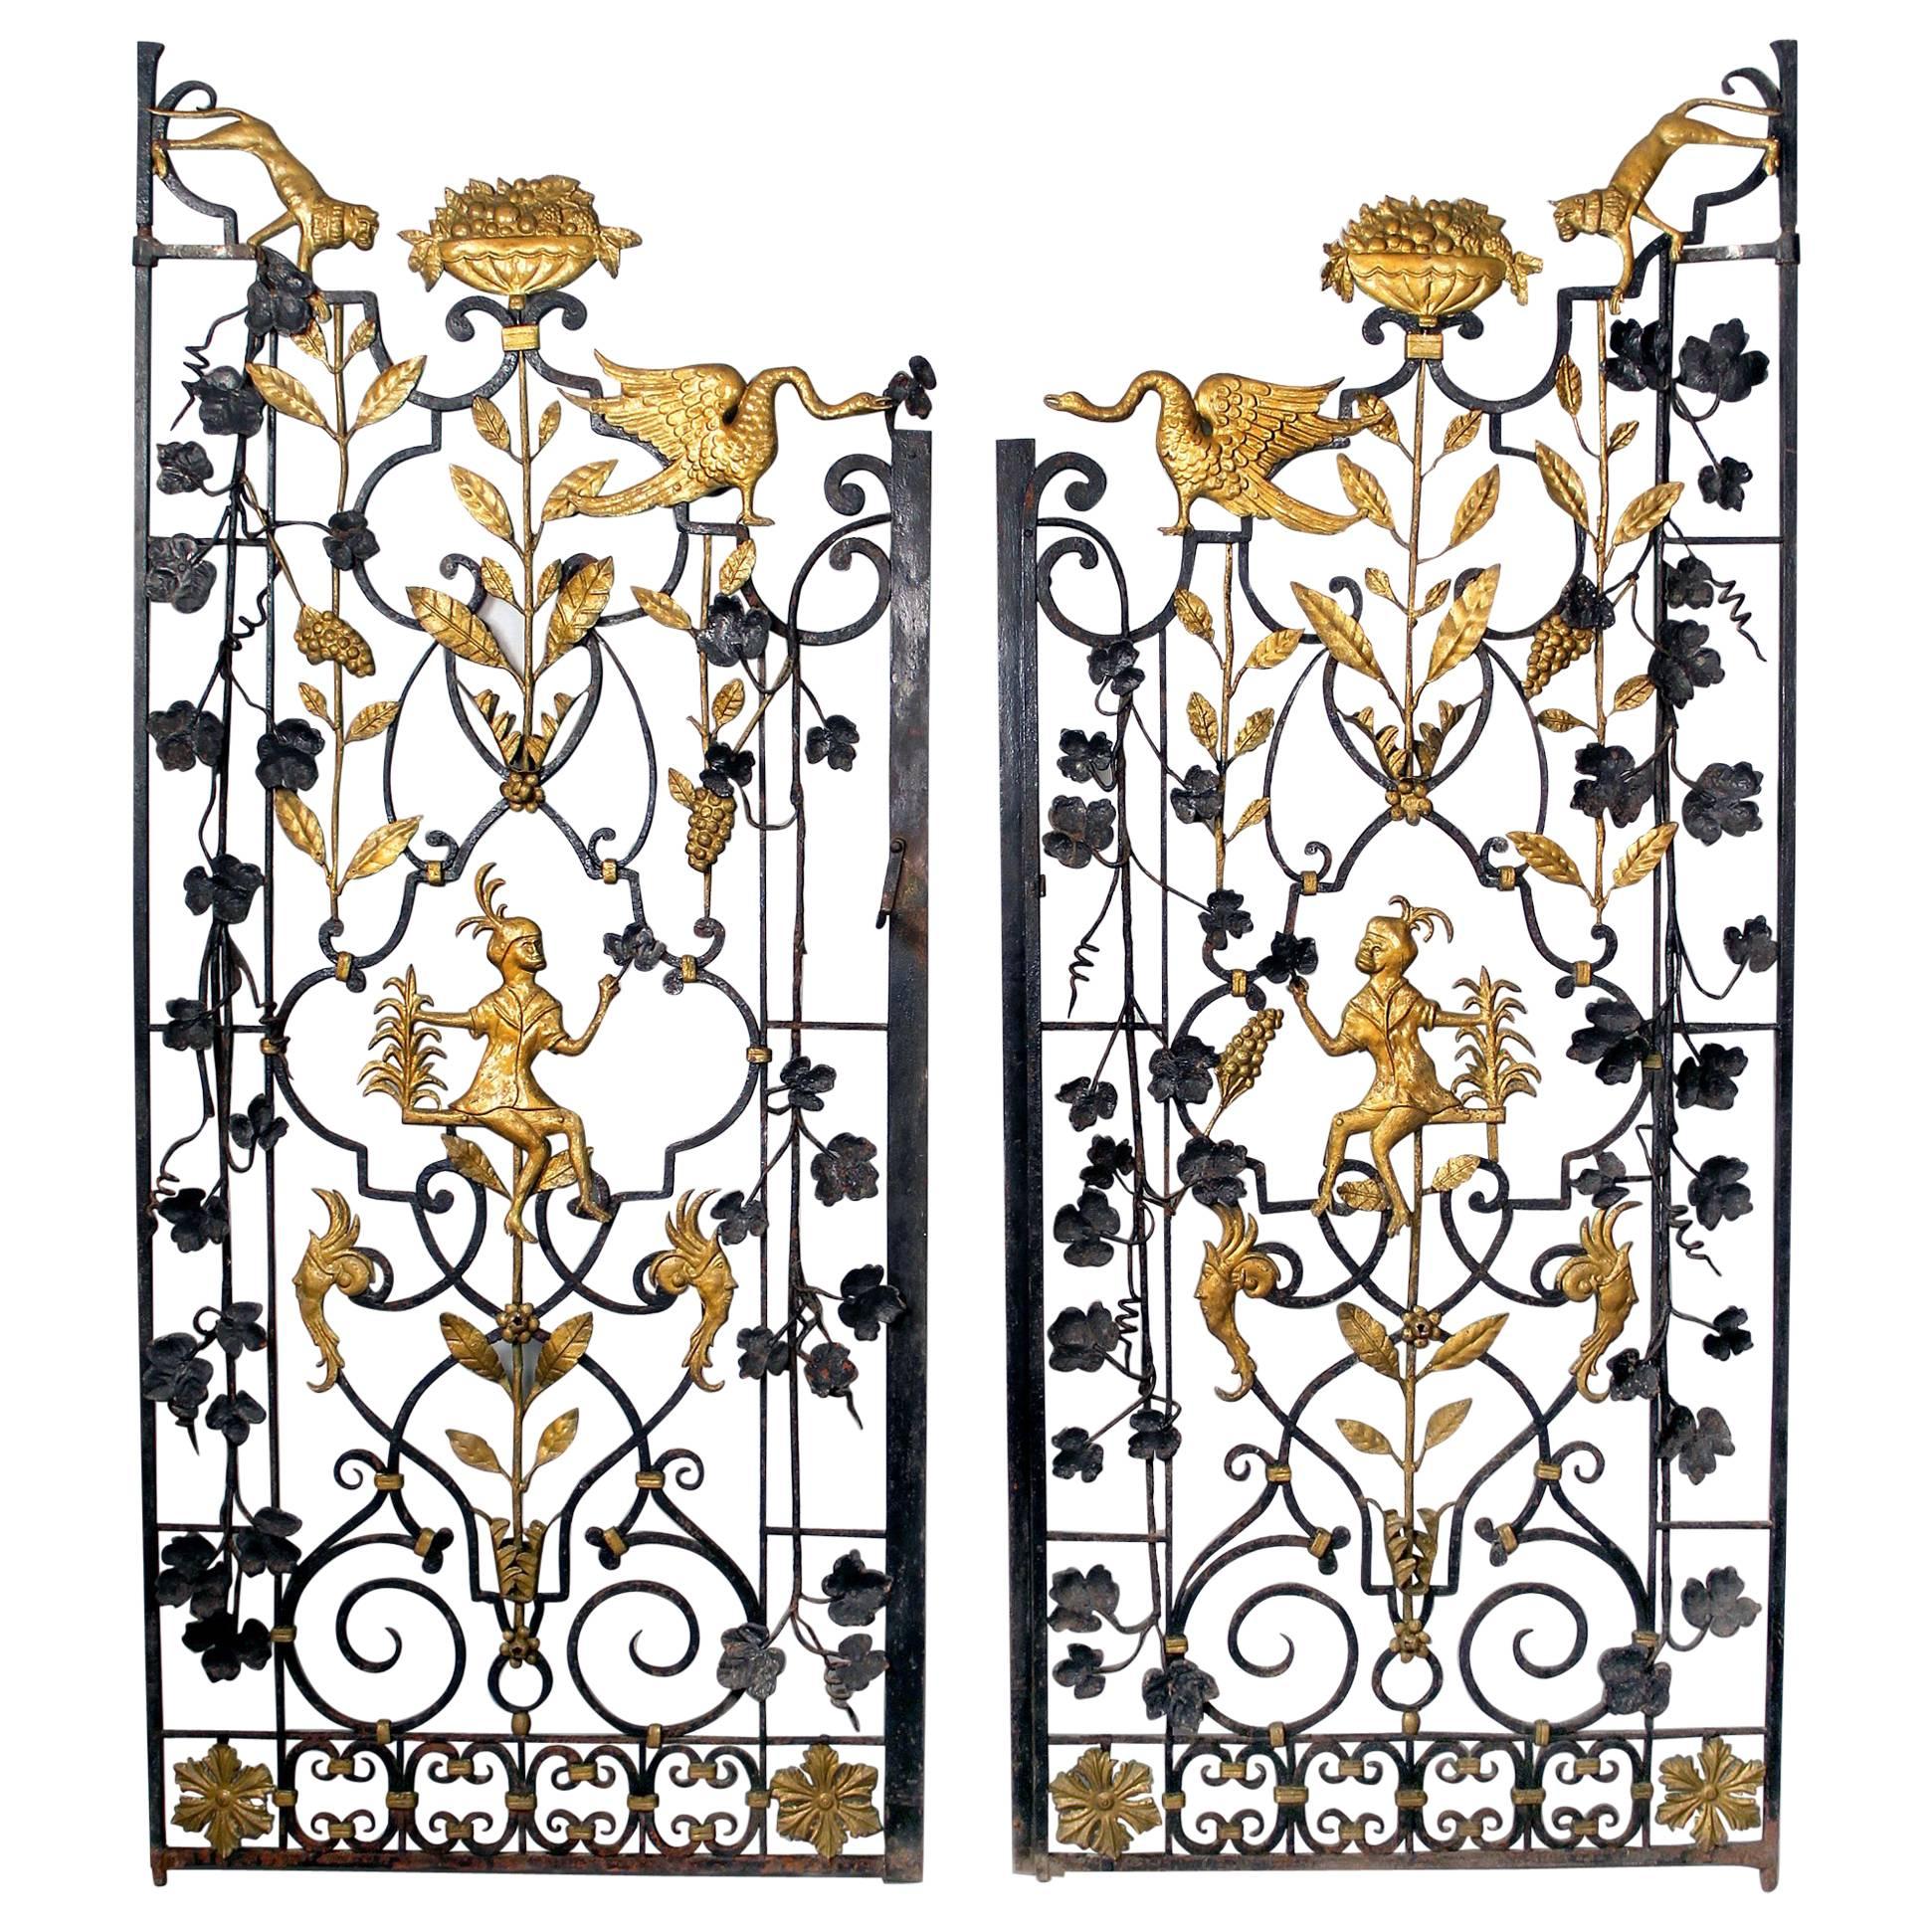 Early 20th Century Art Deco Gold Painted Two-Door Iron Gate